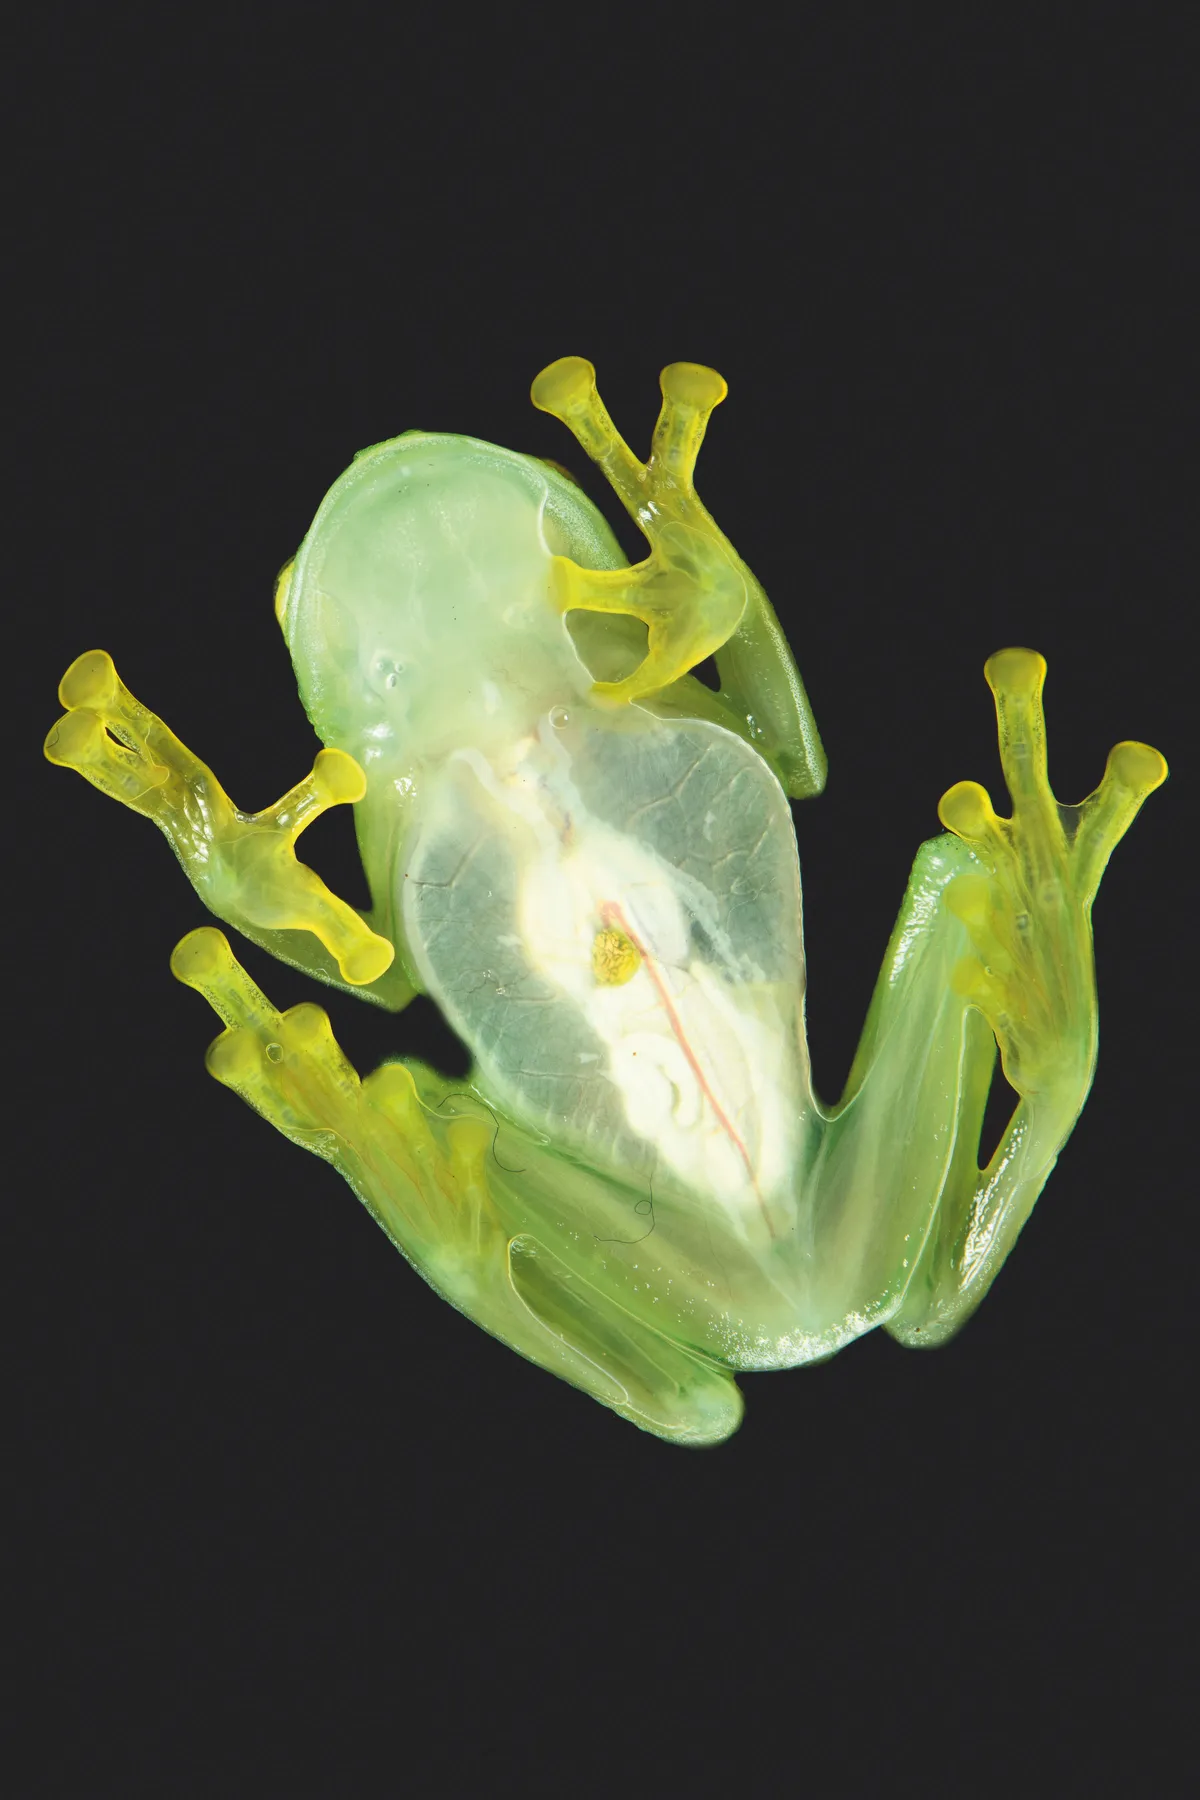 This tree frog has translucent skin on its belly, which makes its internal organs clearly visible from underneath. Elsewhere its skin is pale green, camouflaging it amidst the forest’s foliage. Photo by Getty images